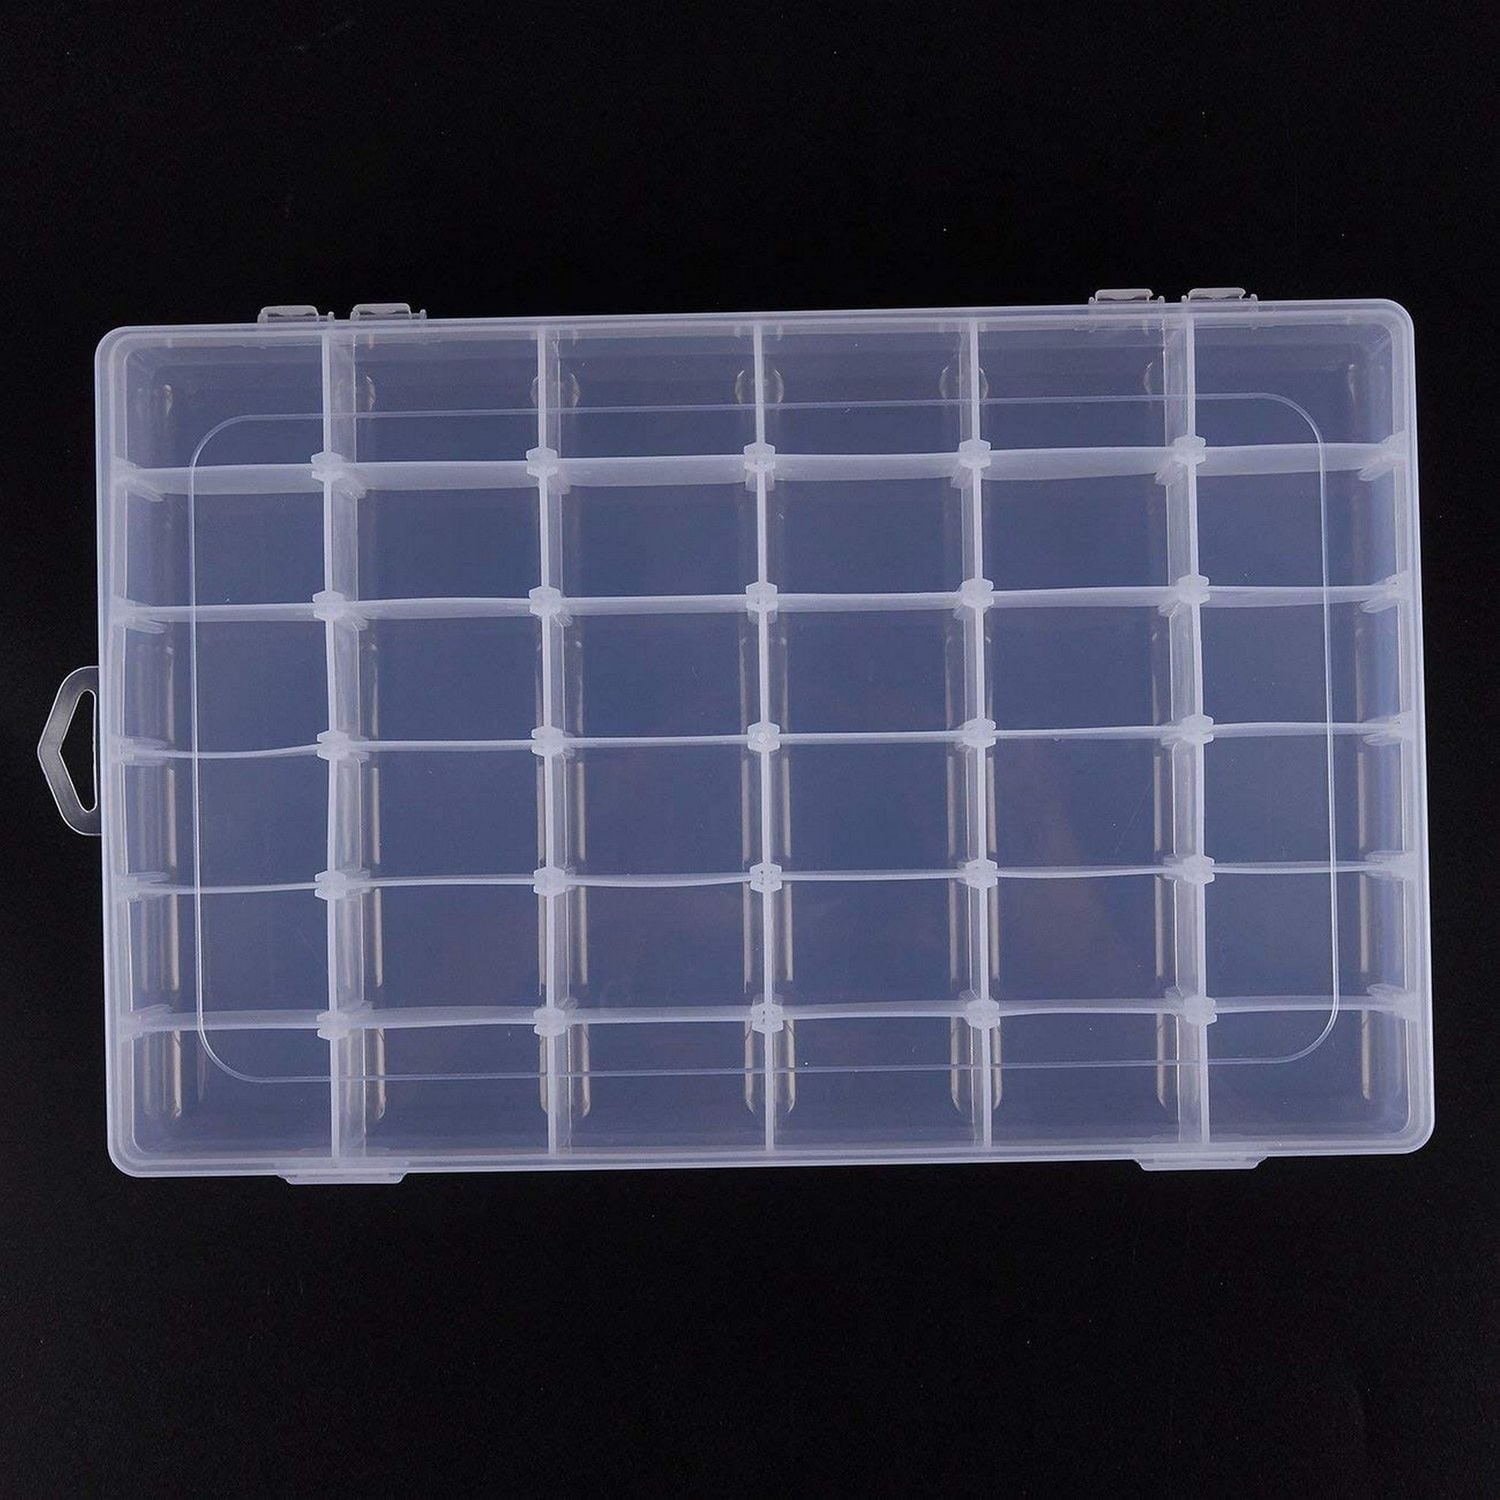 JINGT Clear Plastic Jewelry Bead Storage Box 3 Layers Container Organizer  Case Craft 